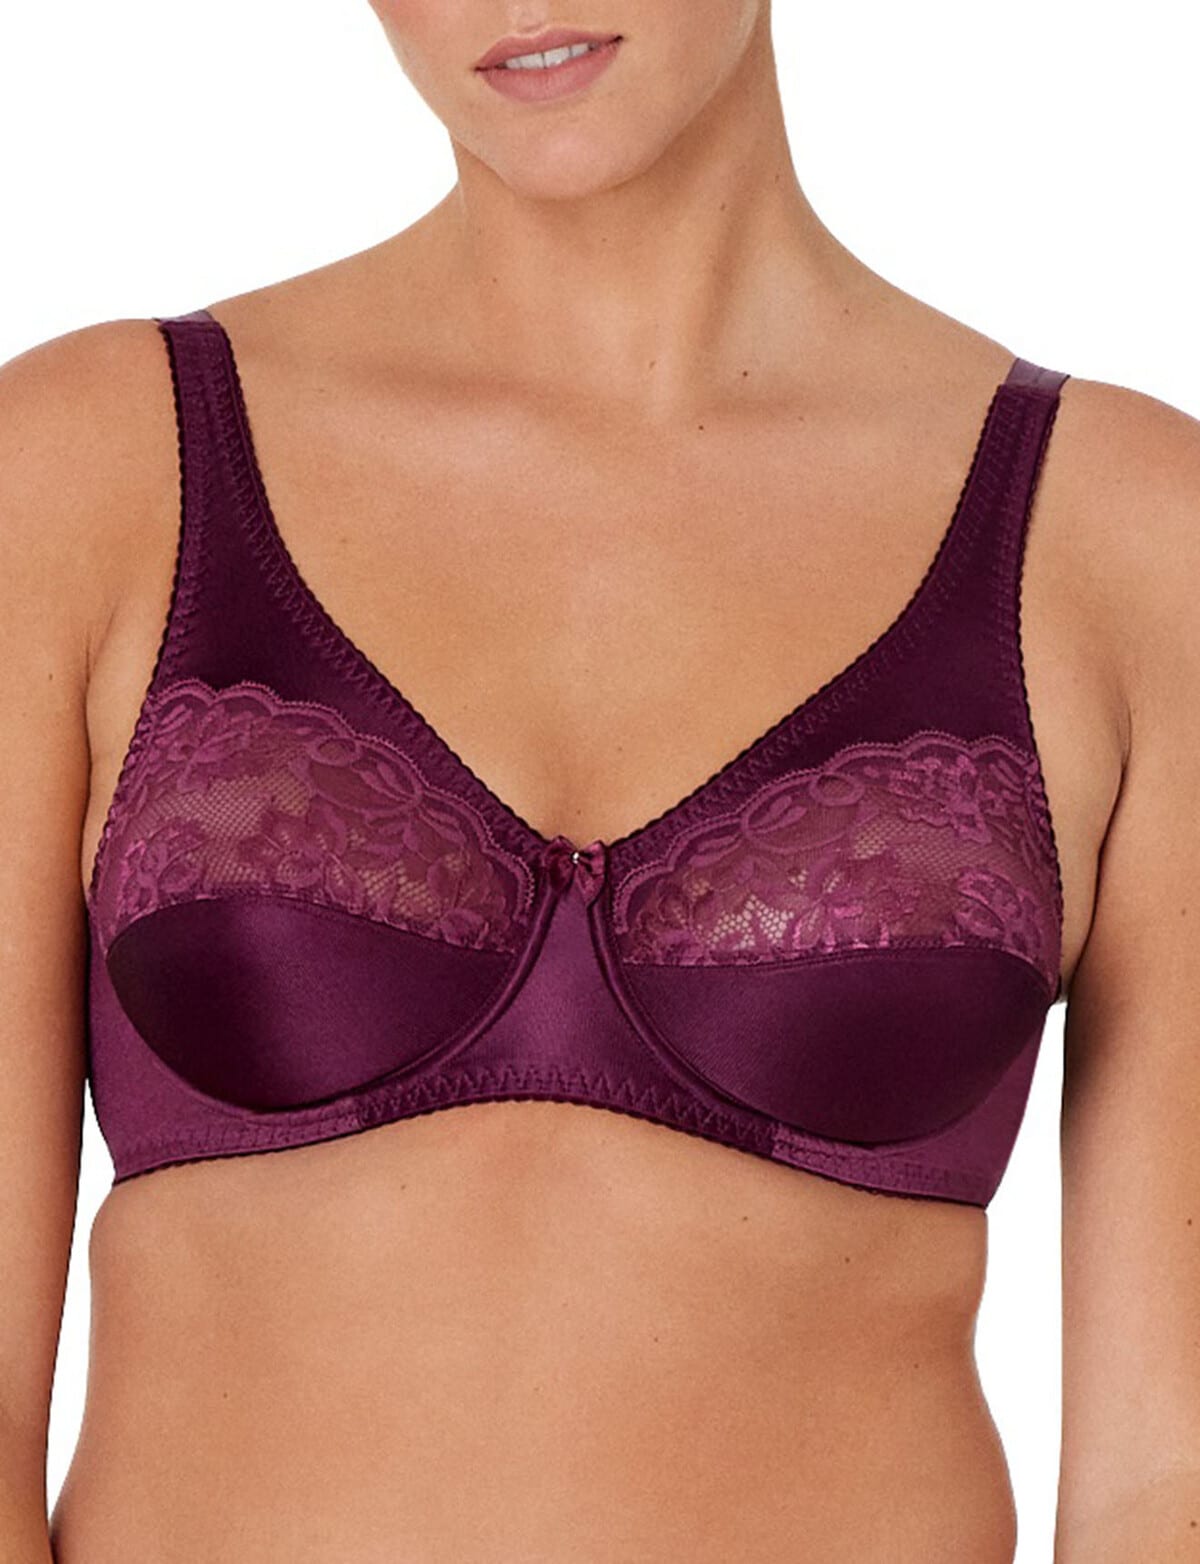 Valmont Brown Unlined Sheer Embroidered Lace Underwire Bra Size 40DD -  Ceylon Exports & Trading Sri Lanka